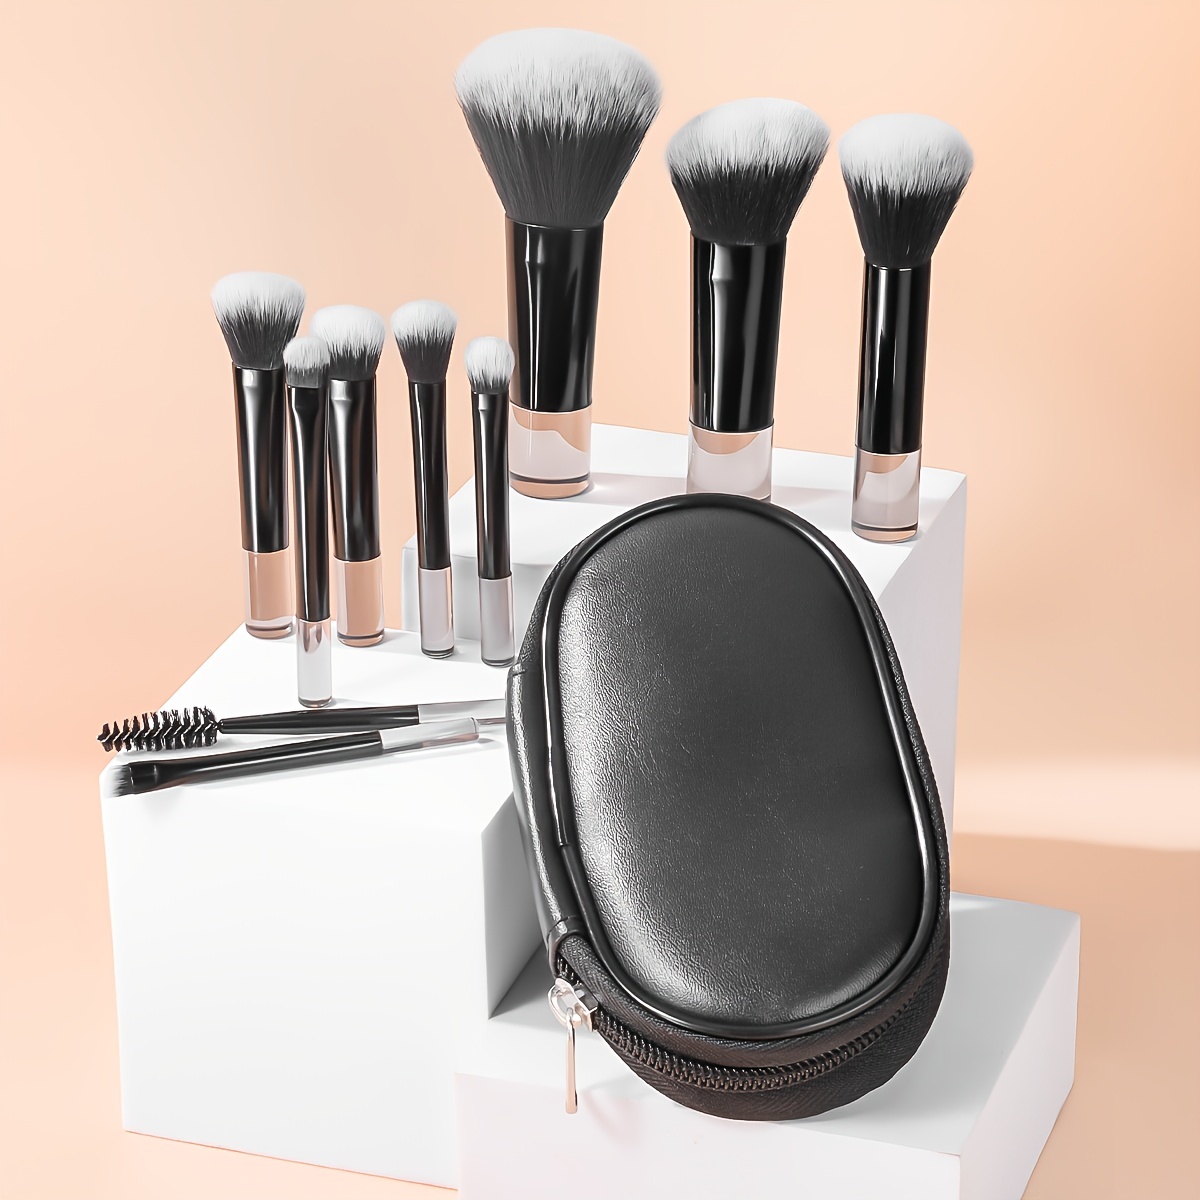  CANIPHA Travel Makeup Brushes Set Professional with Mirror,5Pcs  Portable Small Makeup Brush for Women,Mini Makeup Brushes Kit,Cute Make Up  Brushes Case for Face Eye Eyebrow Blush and Lip Gloss (Pink) 